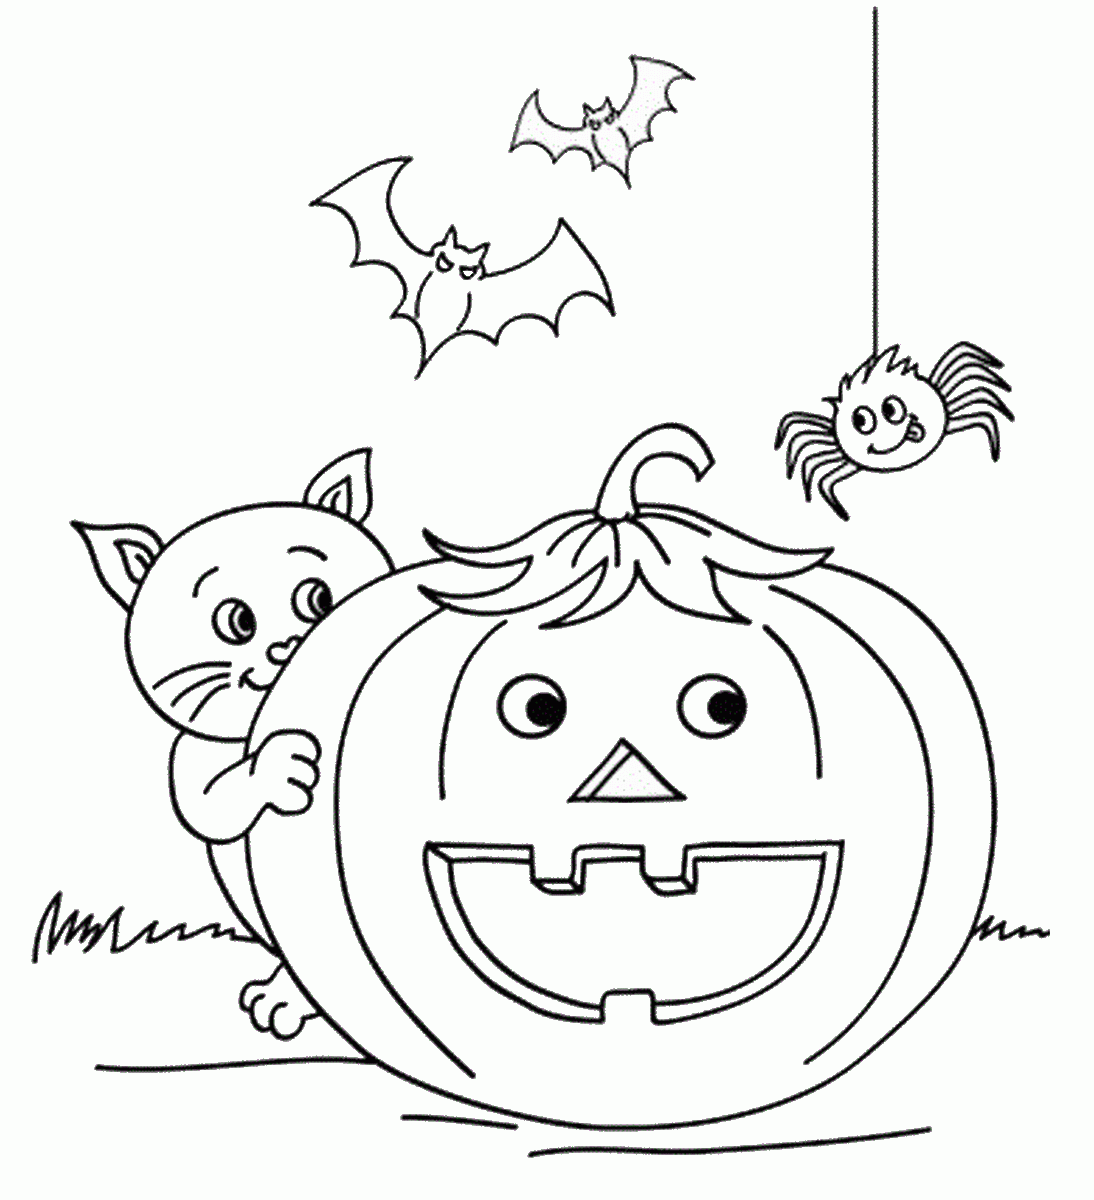 Halloween Coloring Pages Holiday halloween_coloring16 Printable 2021 0628 Coloring4free